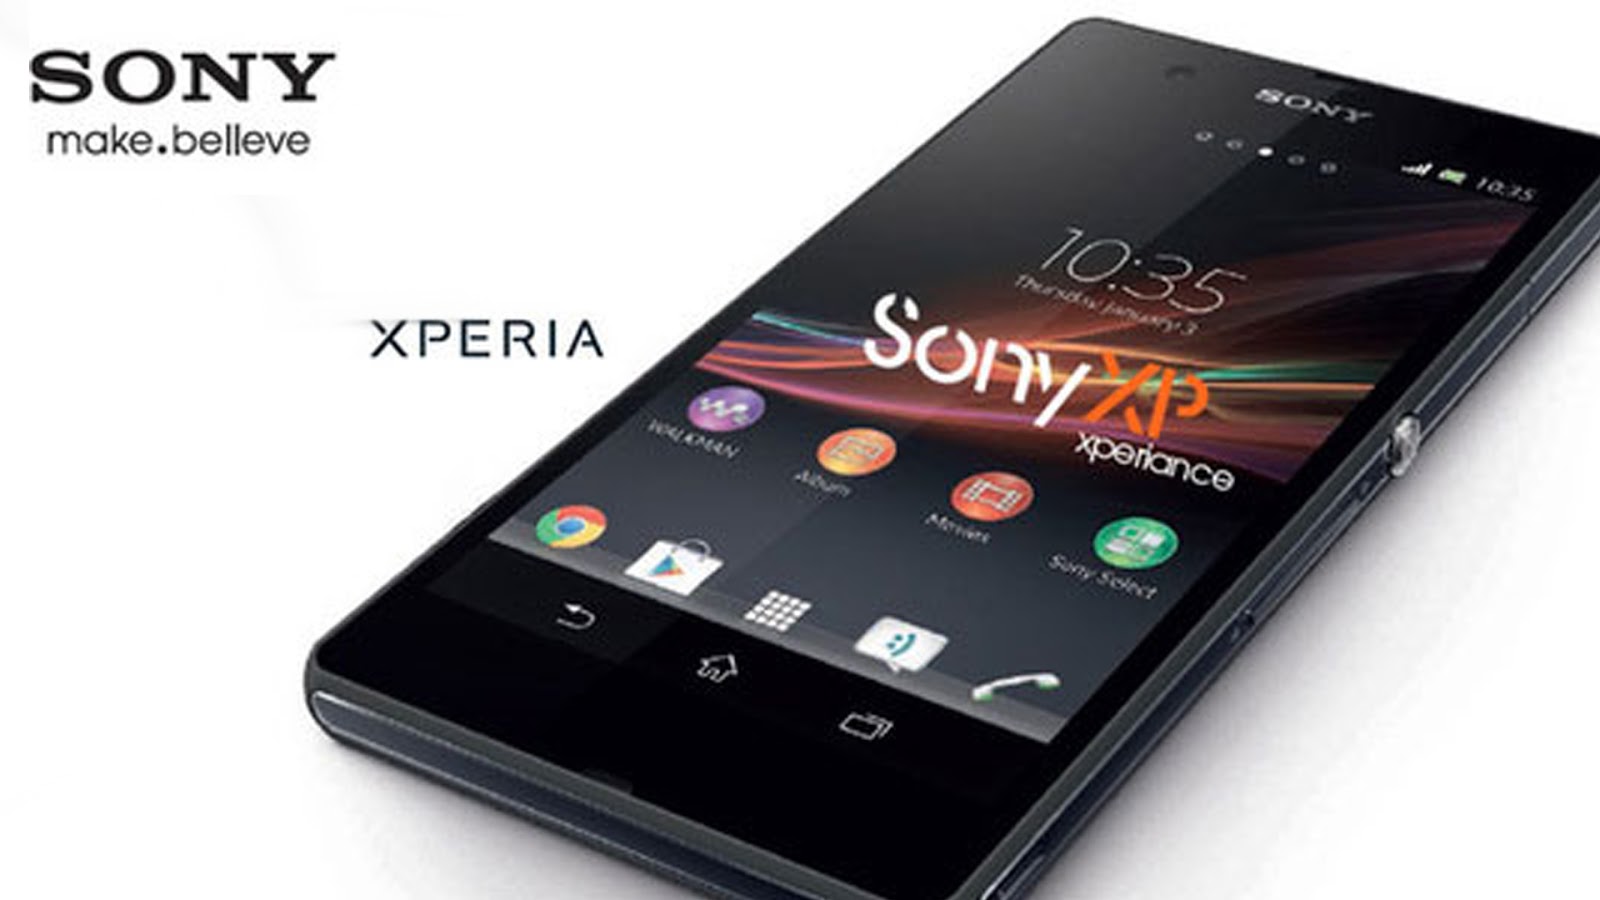 Sony Ericsson Xperia Z Hd Wallpapers - Sony Mobile Price Xperia Z - HD Wallpaper 